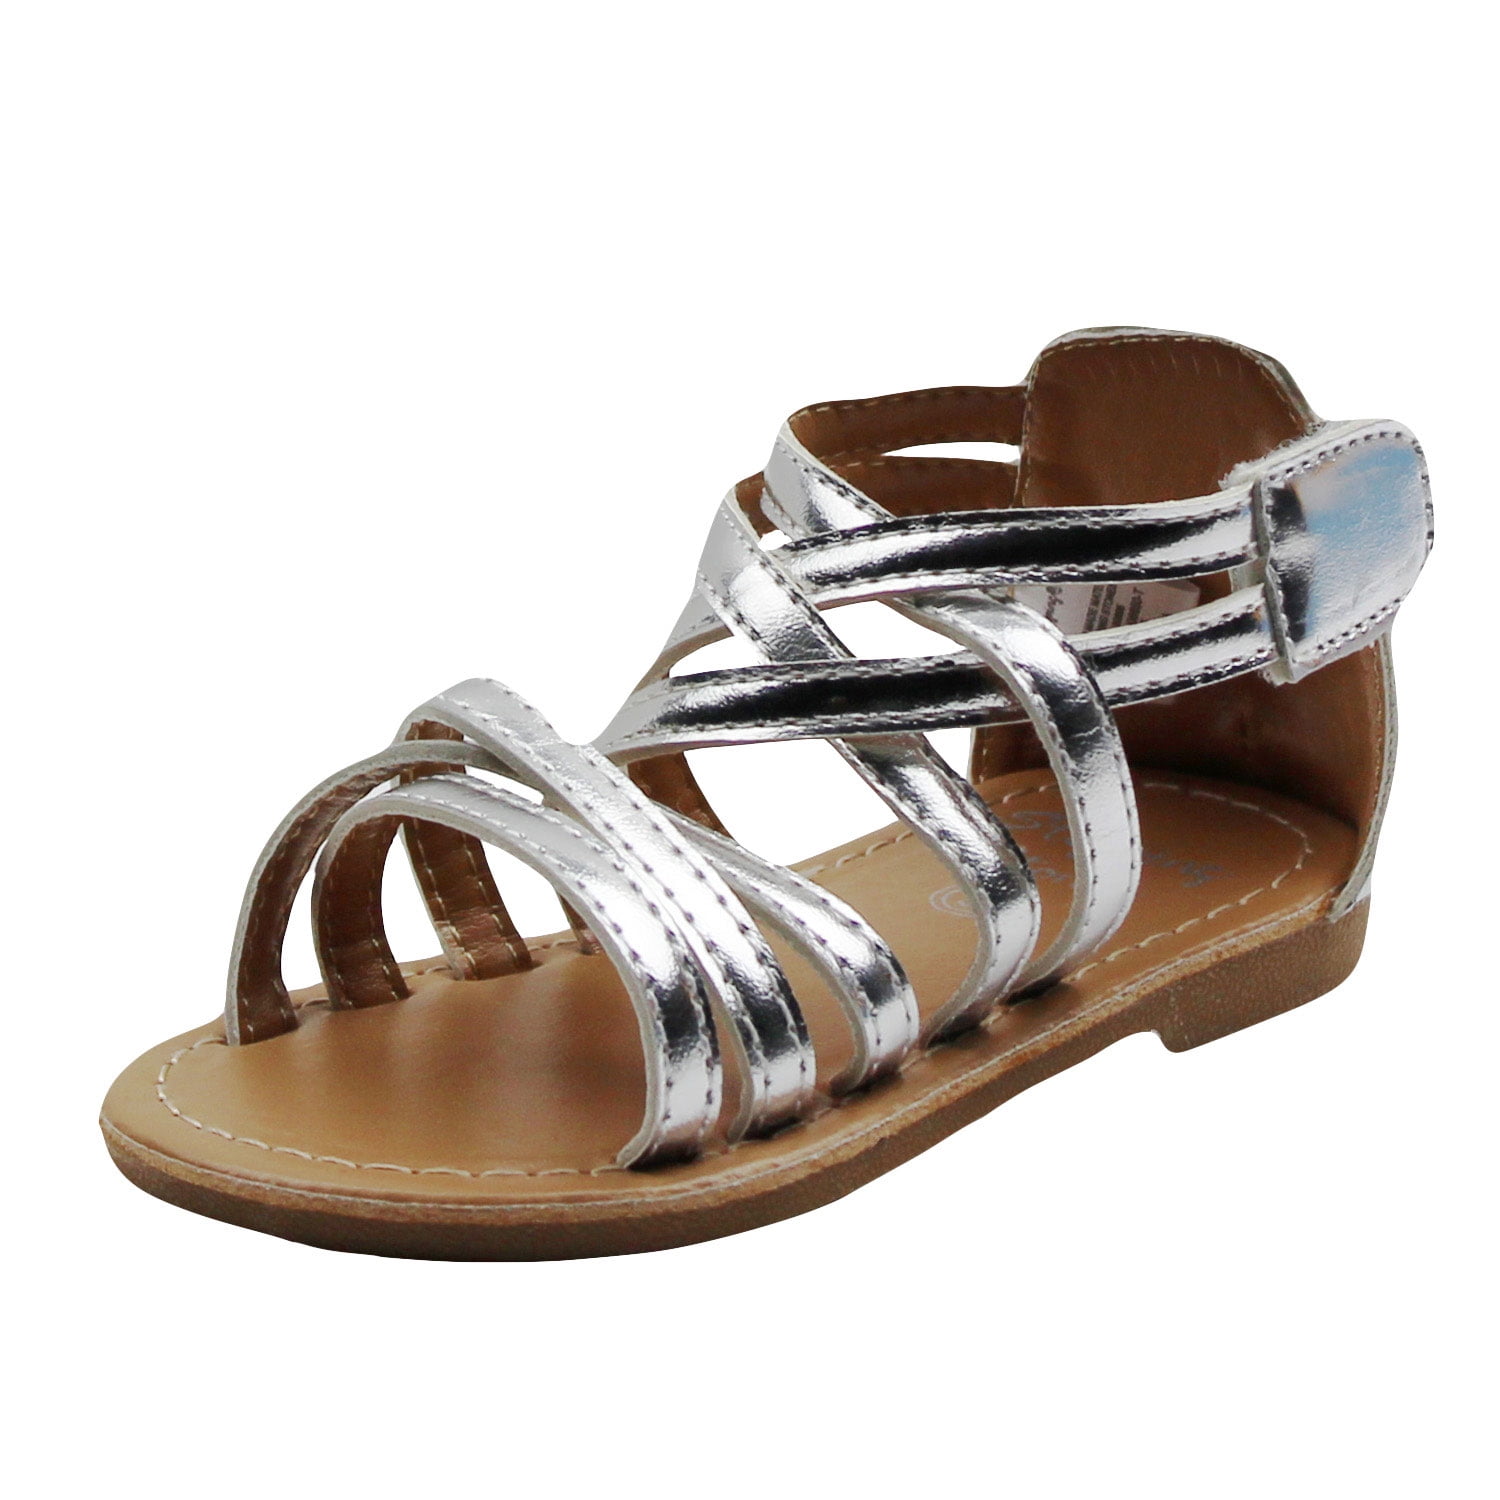 silver sandals size 8